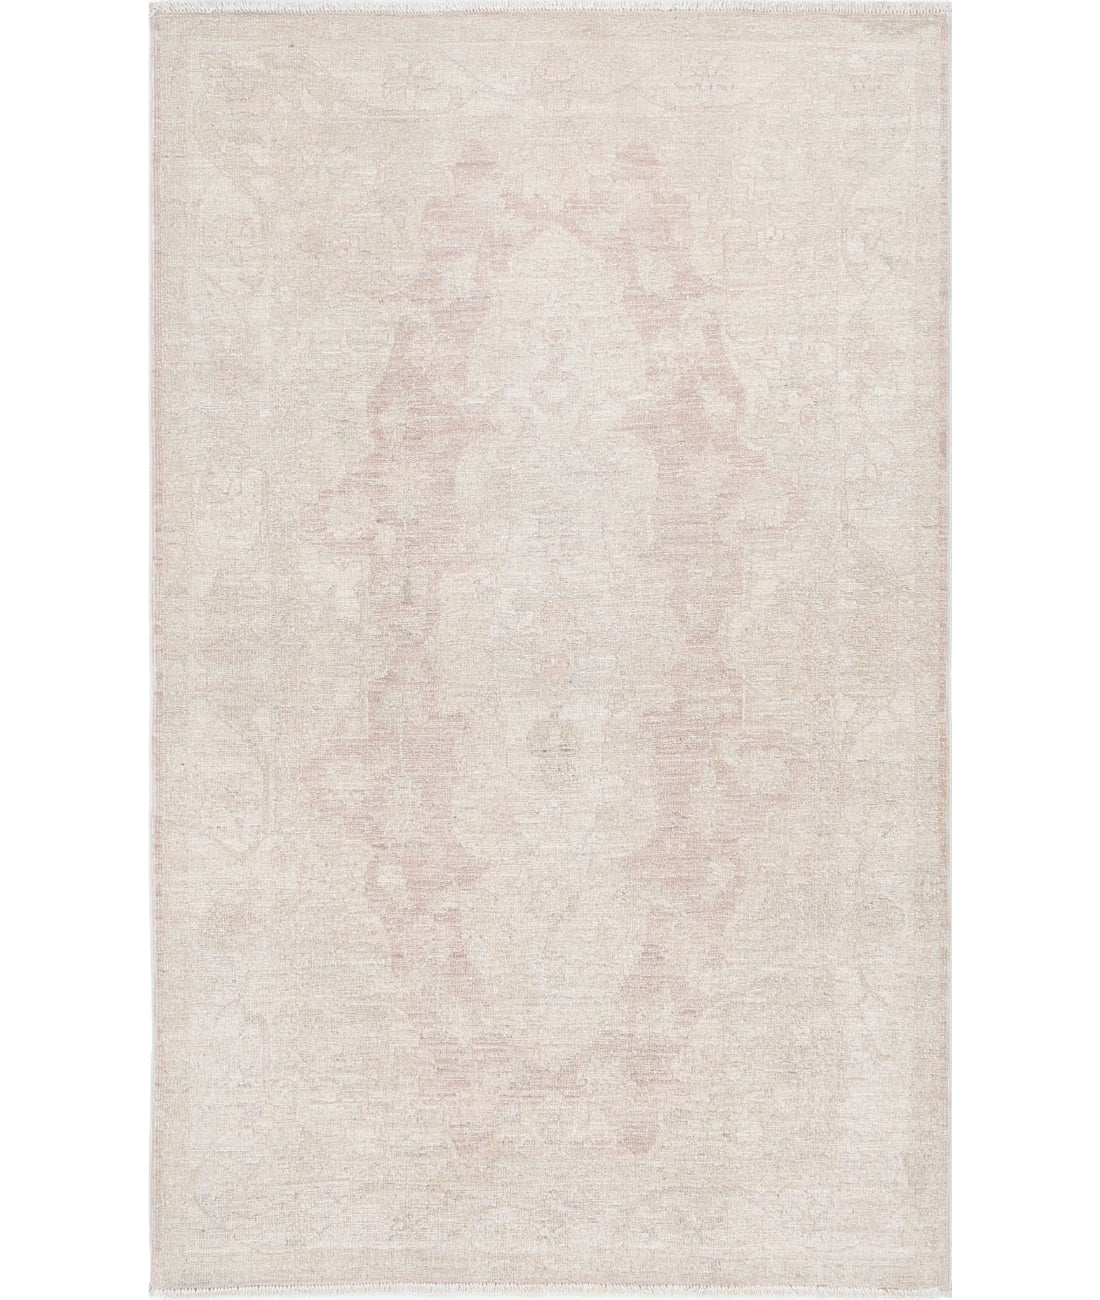 Hand Knotted Serenity Wool Rug - 2&#39;11&#39;&#39; x 4&#39;8&#39;&#39; 2&#39;11&#39;&#39; x 4&#39;8&#39;&#39; (88 X 140) / Pink / Ivory